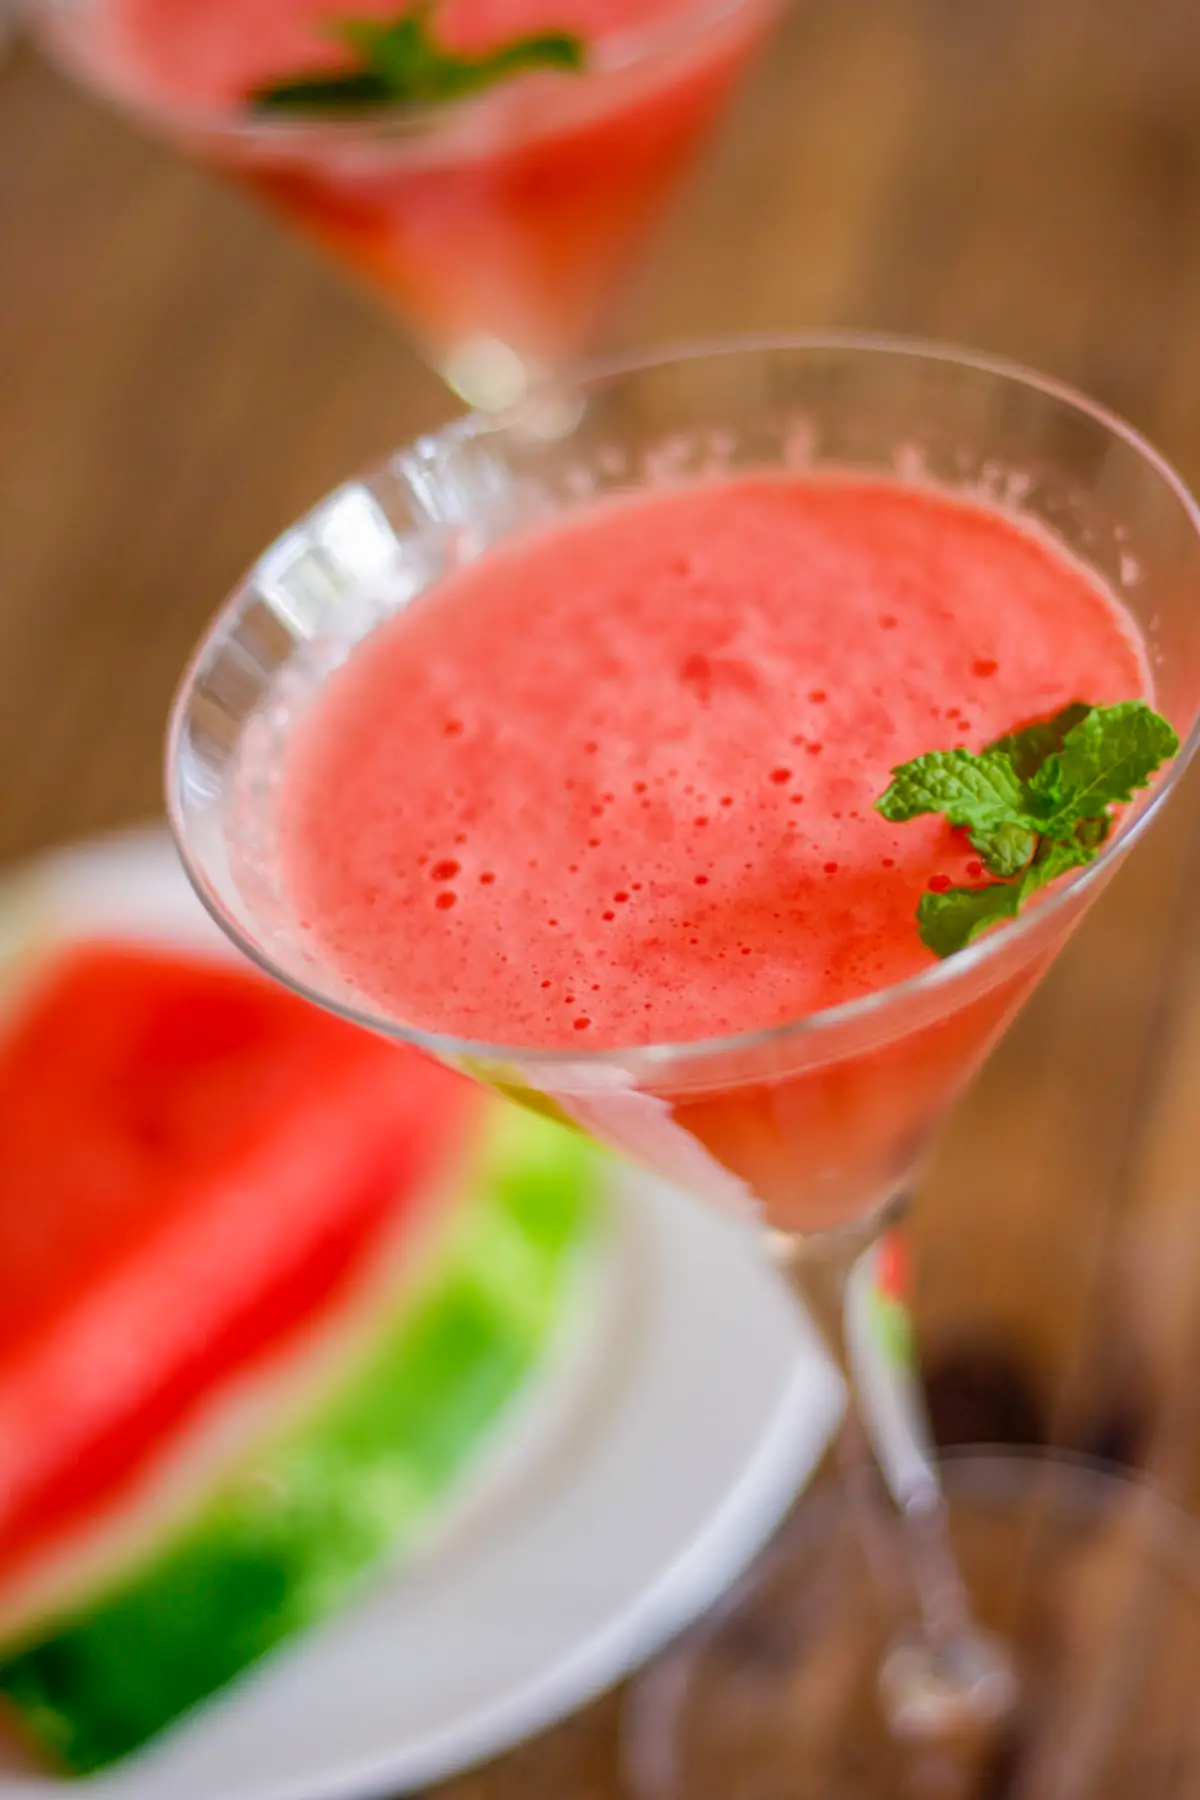 Martini glass filled with watermelon mocktail garnished with mint and one in the background and a white plate with watermelon slices.